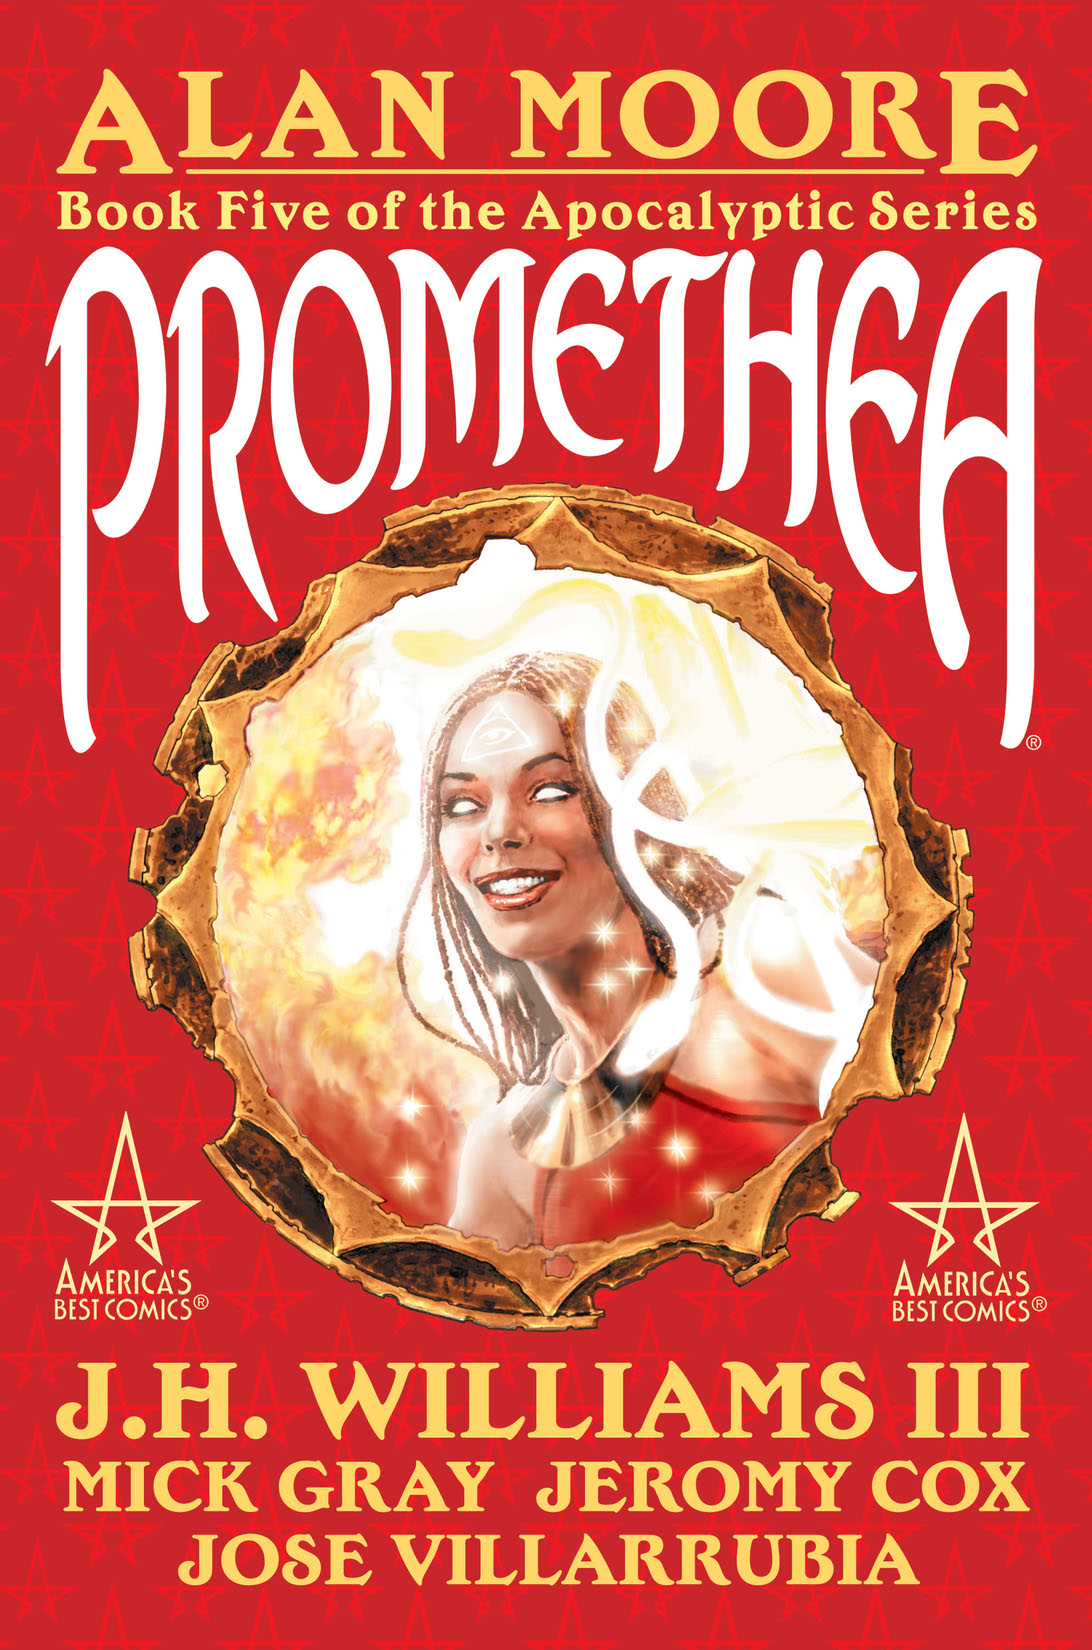 Promethea Book Five preview images